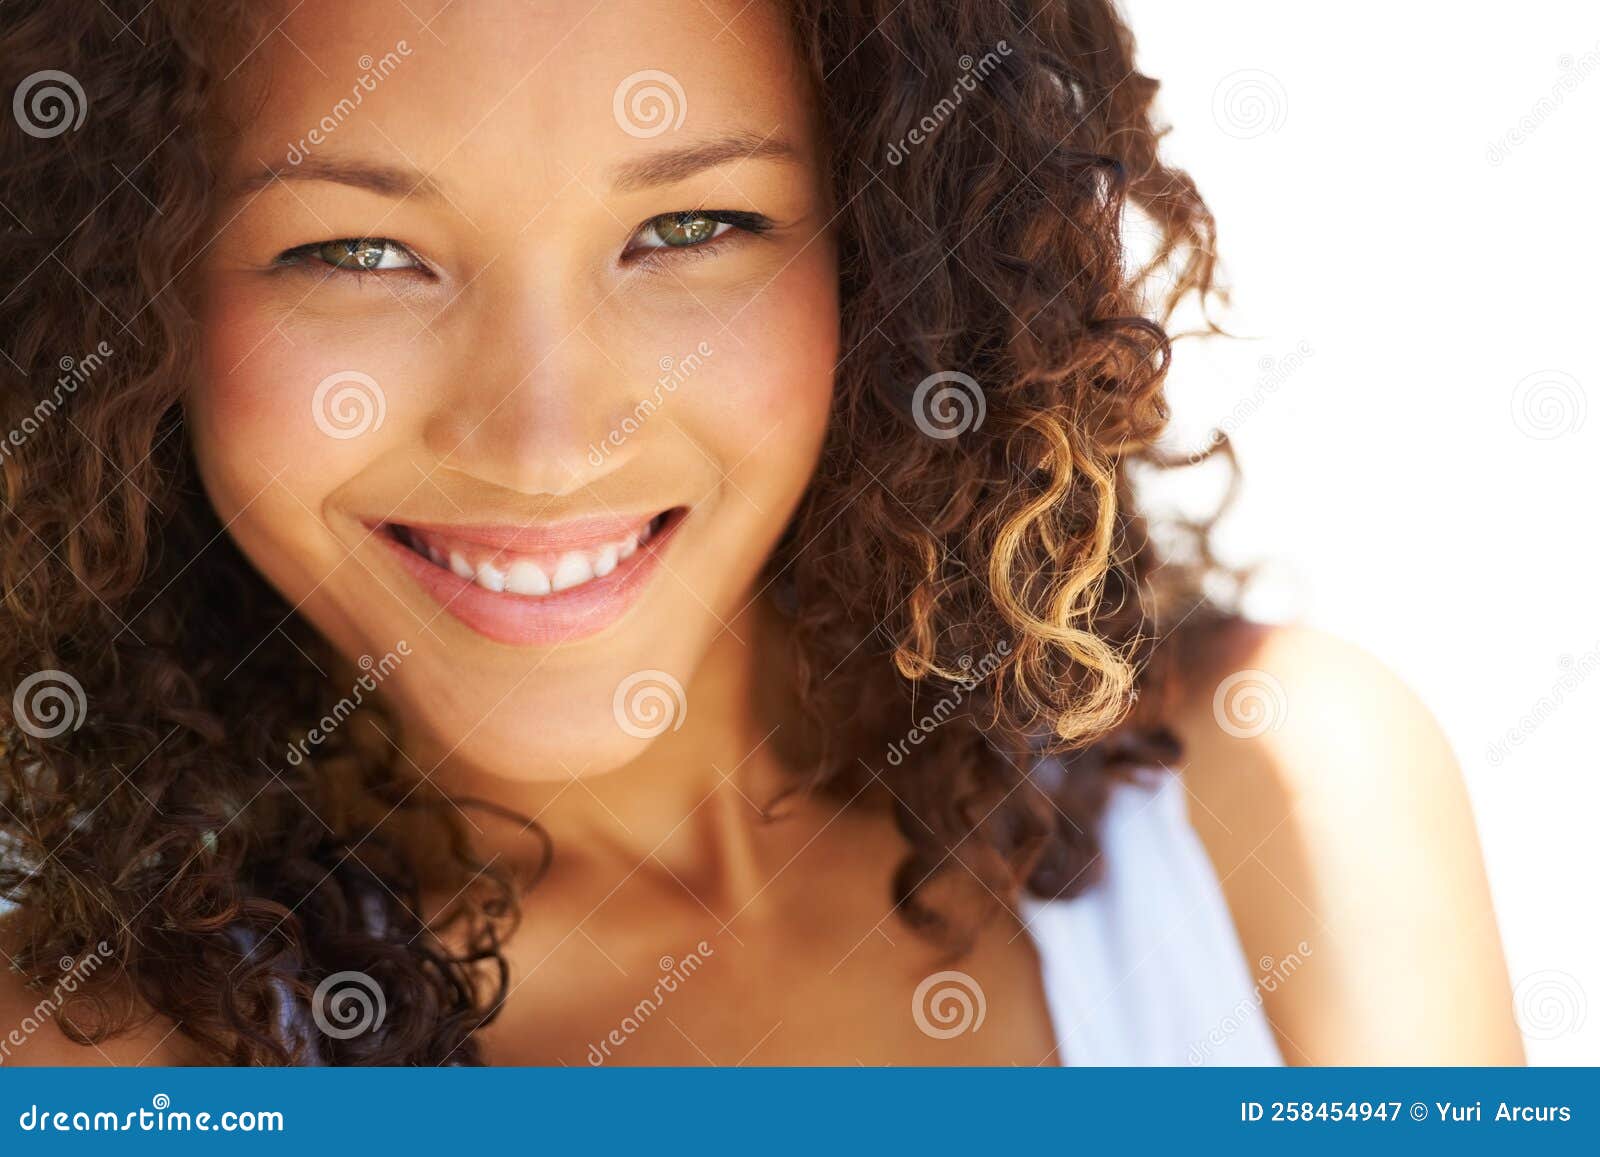 Shes Always Smiling Naturally Gorgeous Young Woman Looking At You With